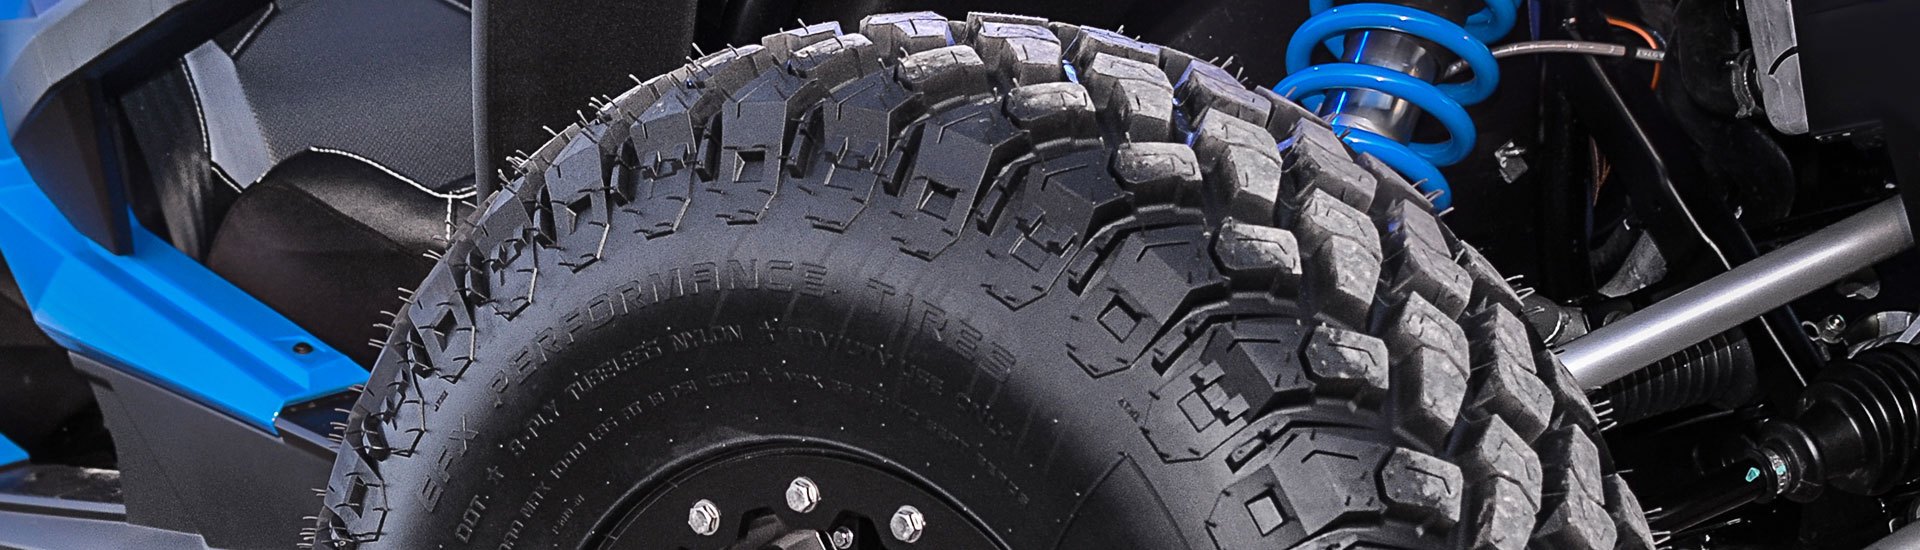 TireChain.com Can-Am Outlander Max 1000R 4x4 Limited 26x10-12 Rear ATV Studded Tire Chains